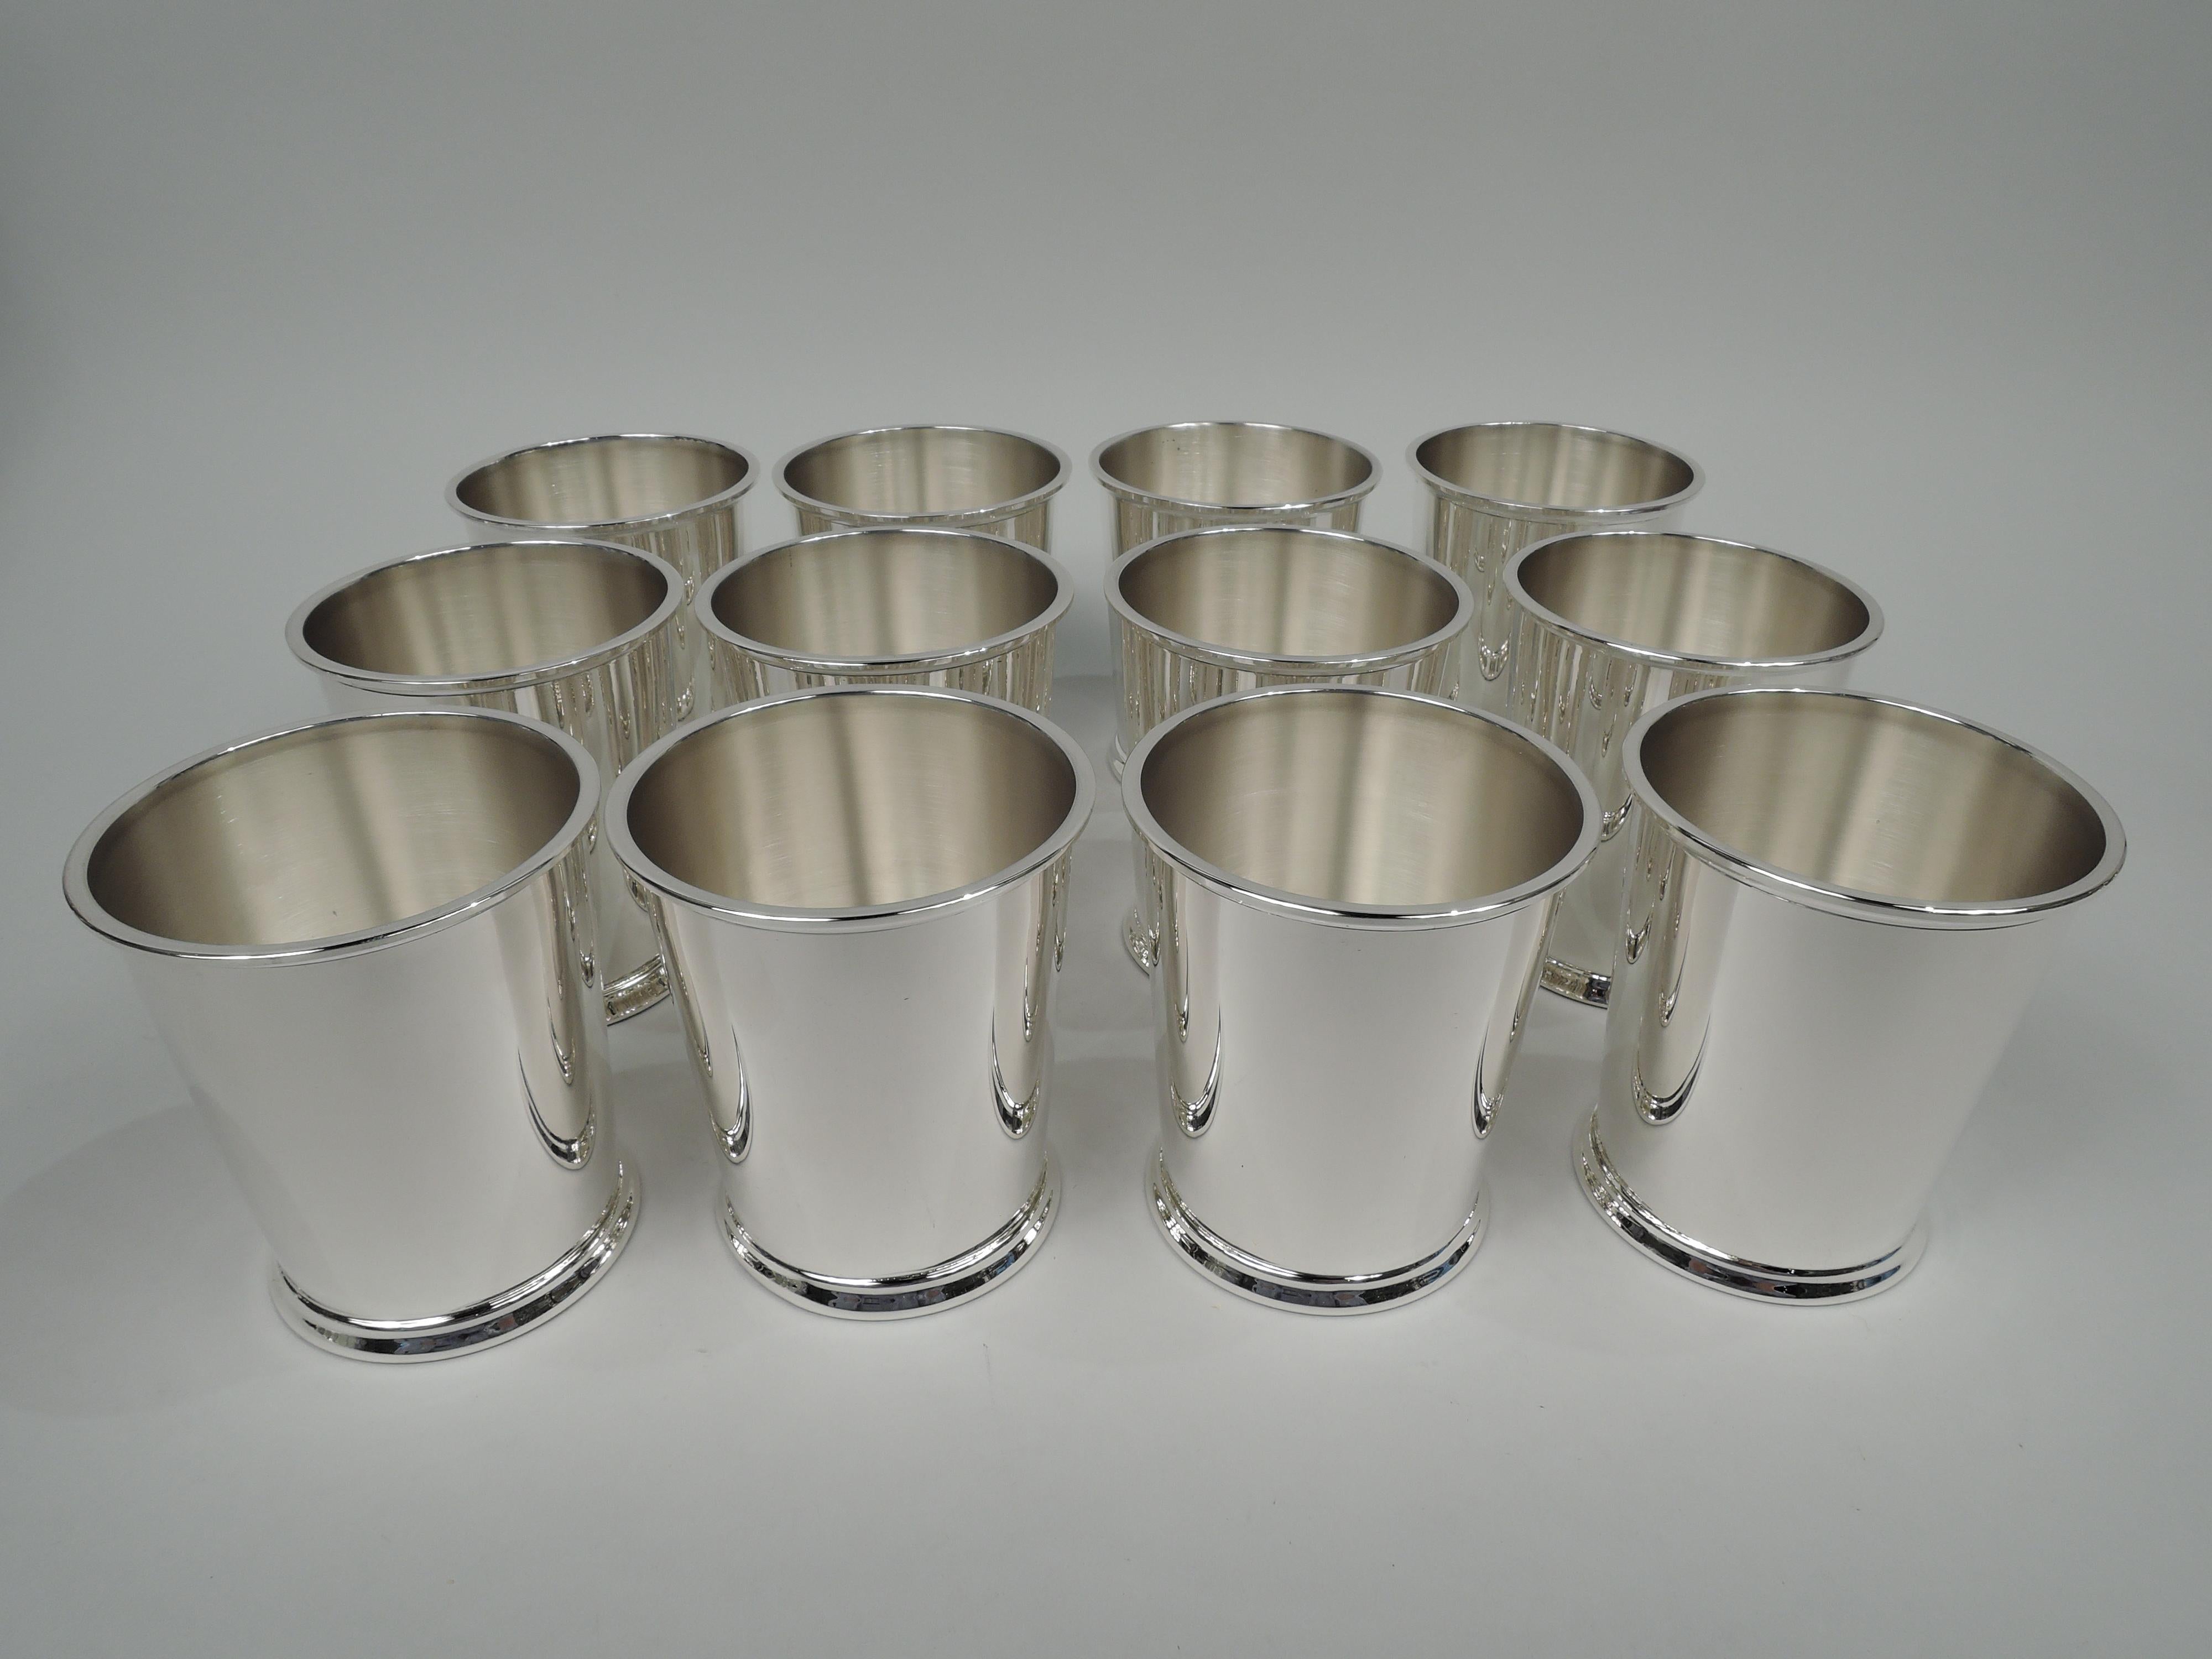 Set of 12 sterling silver mint julep cups. Made by Fisher Silversmiths, Inc. in Jersey City. Each: Straight and tapering sides, flat molded rim, and skirted foot. Fully marked including maker’s stamp and no. 87. Total weight: 47.3 troy ounces.